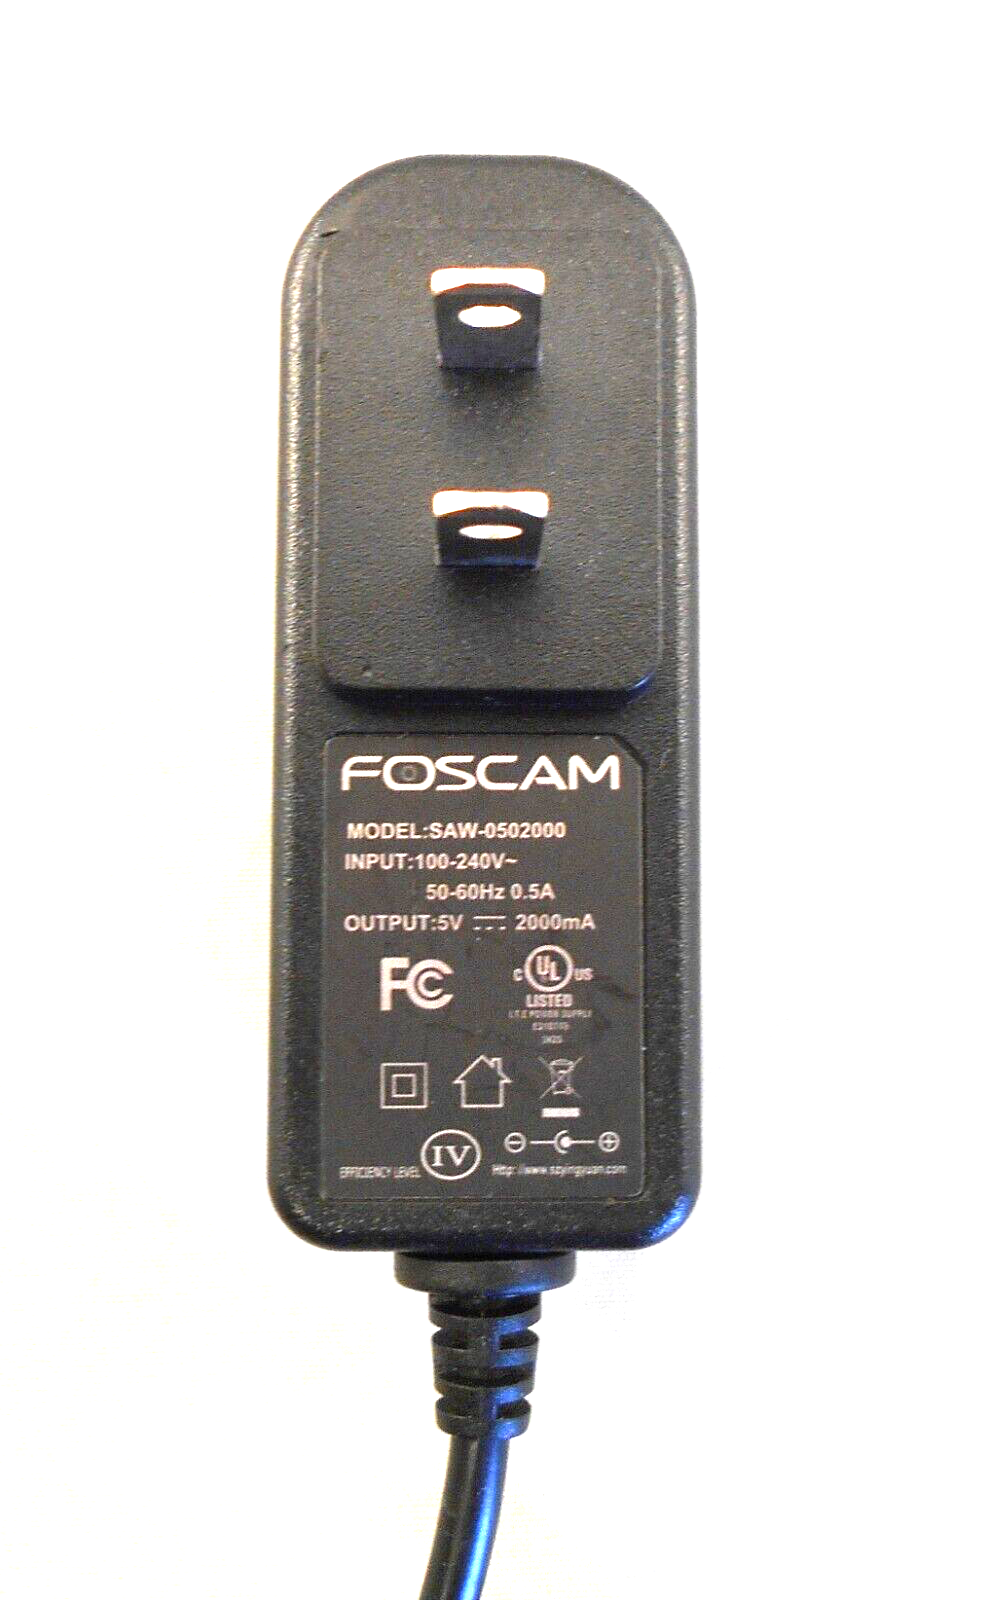 Foscam SAW-0502000 AC Adapter (Black / 1.5m Cable) Brand Foscam Type Adapter Color Black MPN SAW-0502000 Cable Length 1